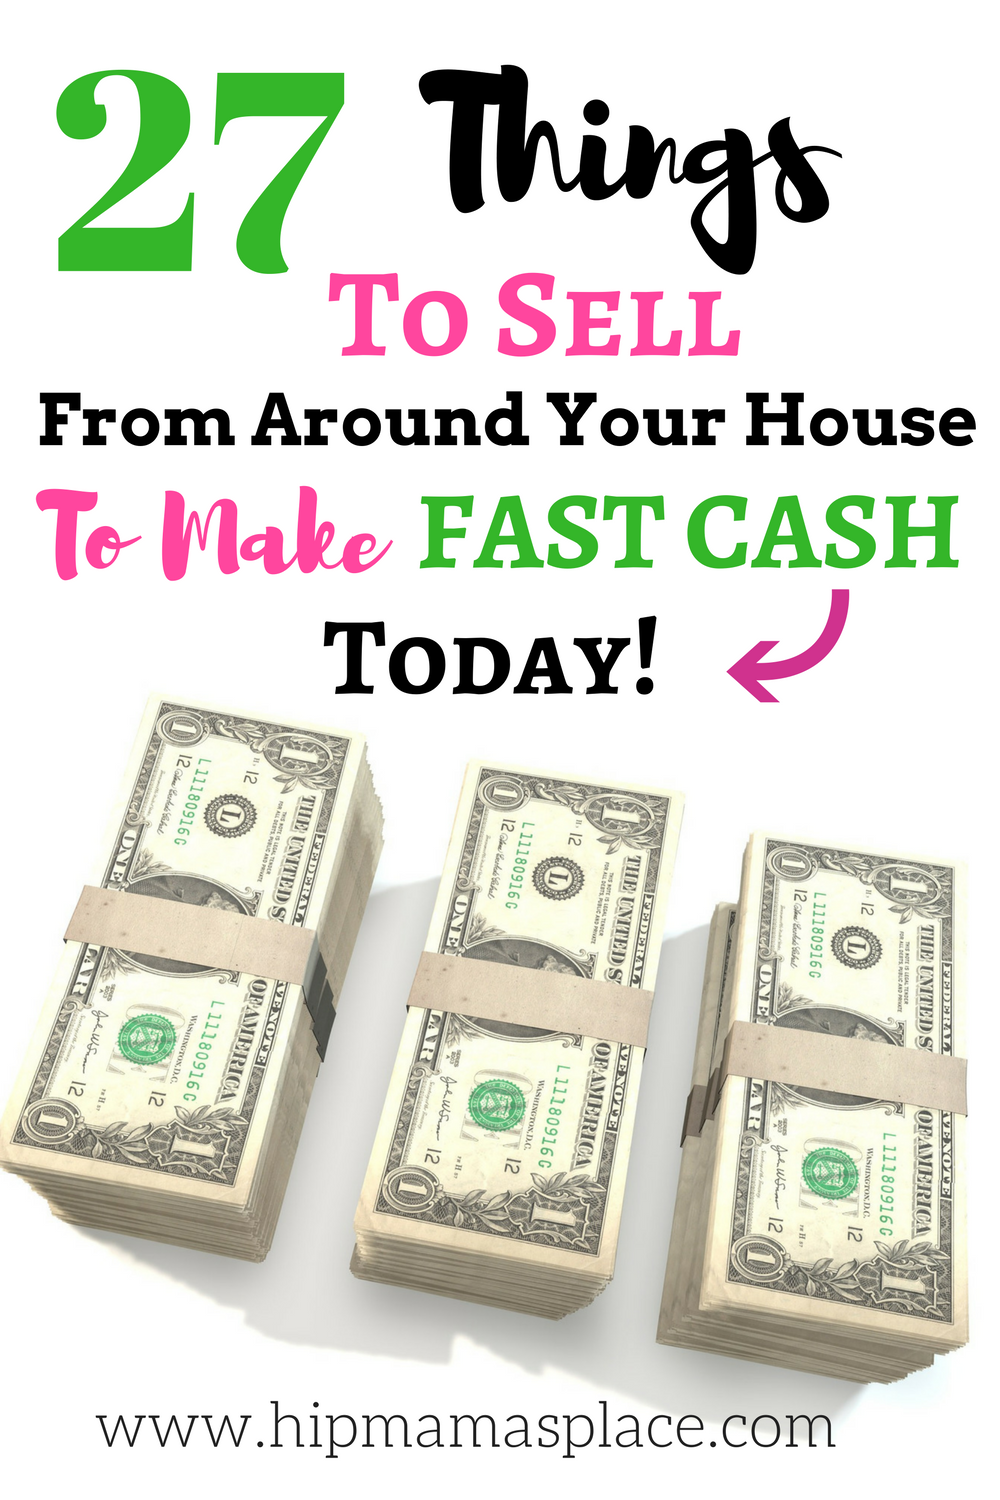 Here are things from around your house to sell for fast cash today!